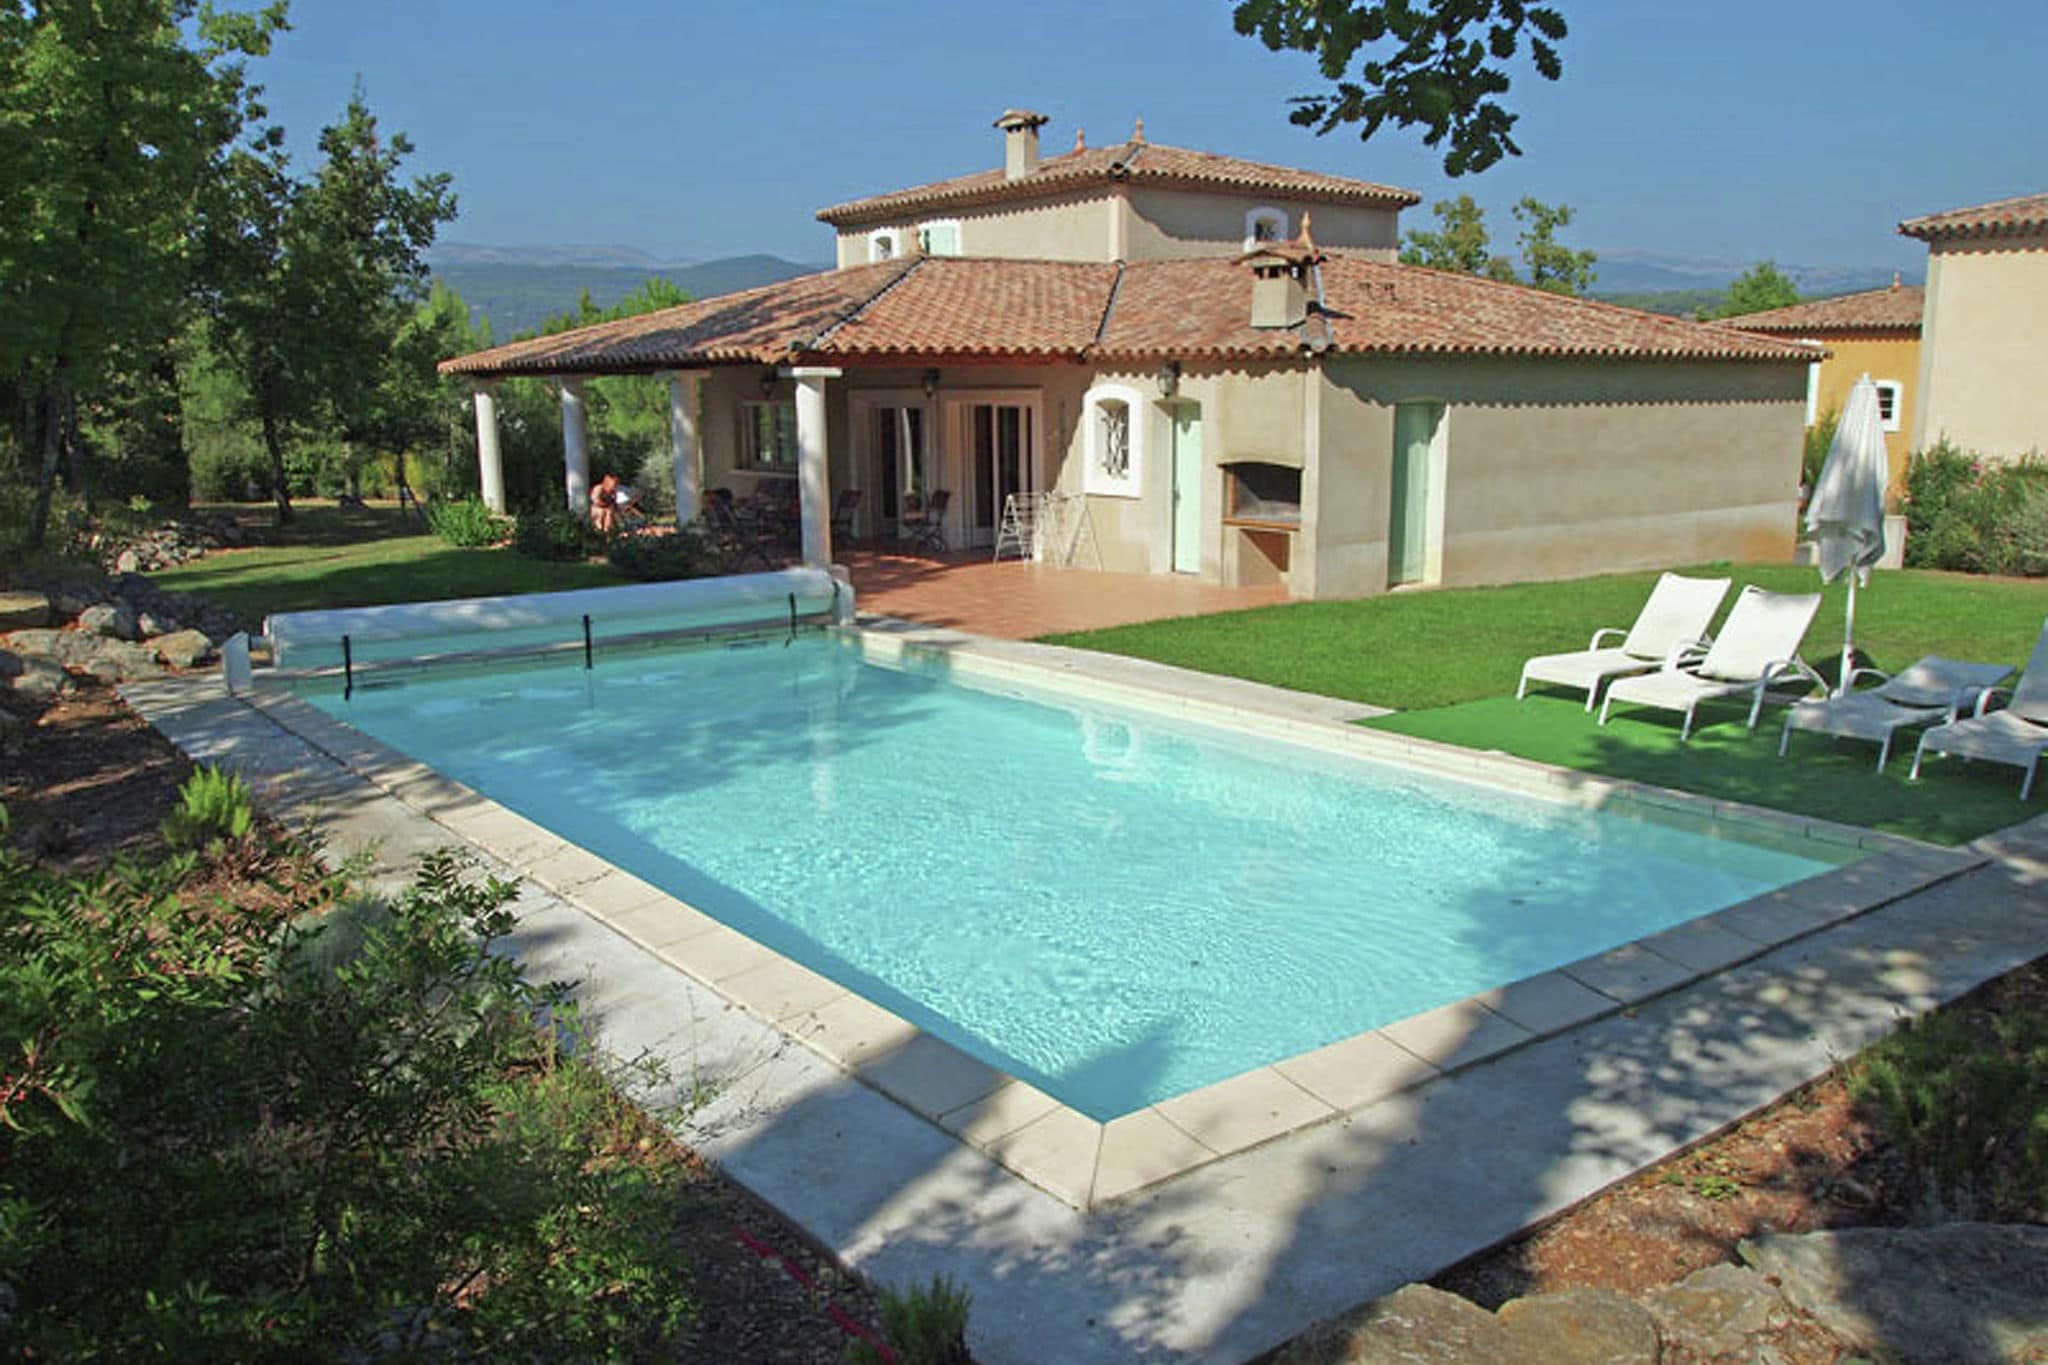 Stylish villa with private pool, charging station and air conditioning in holiday park near Fayence.